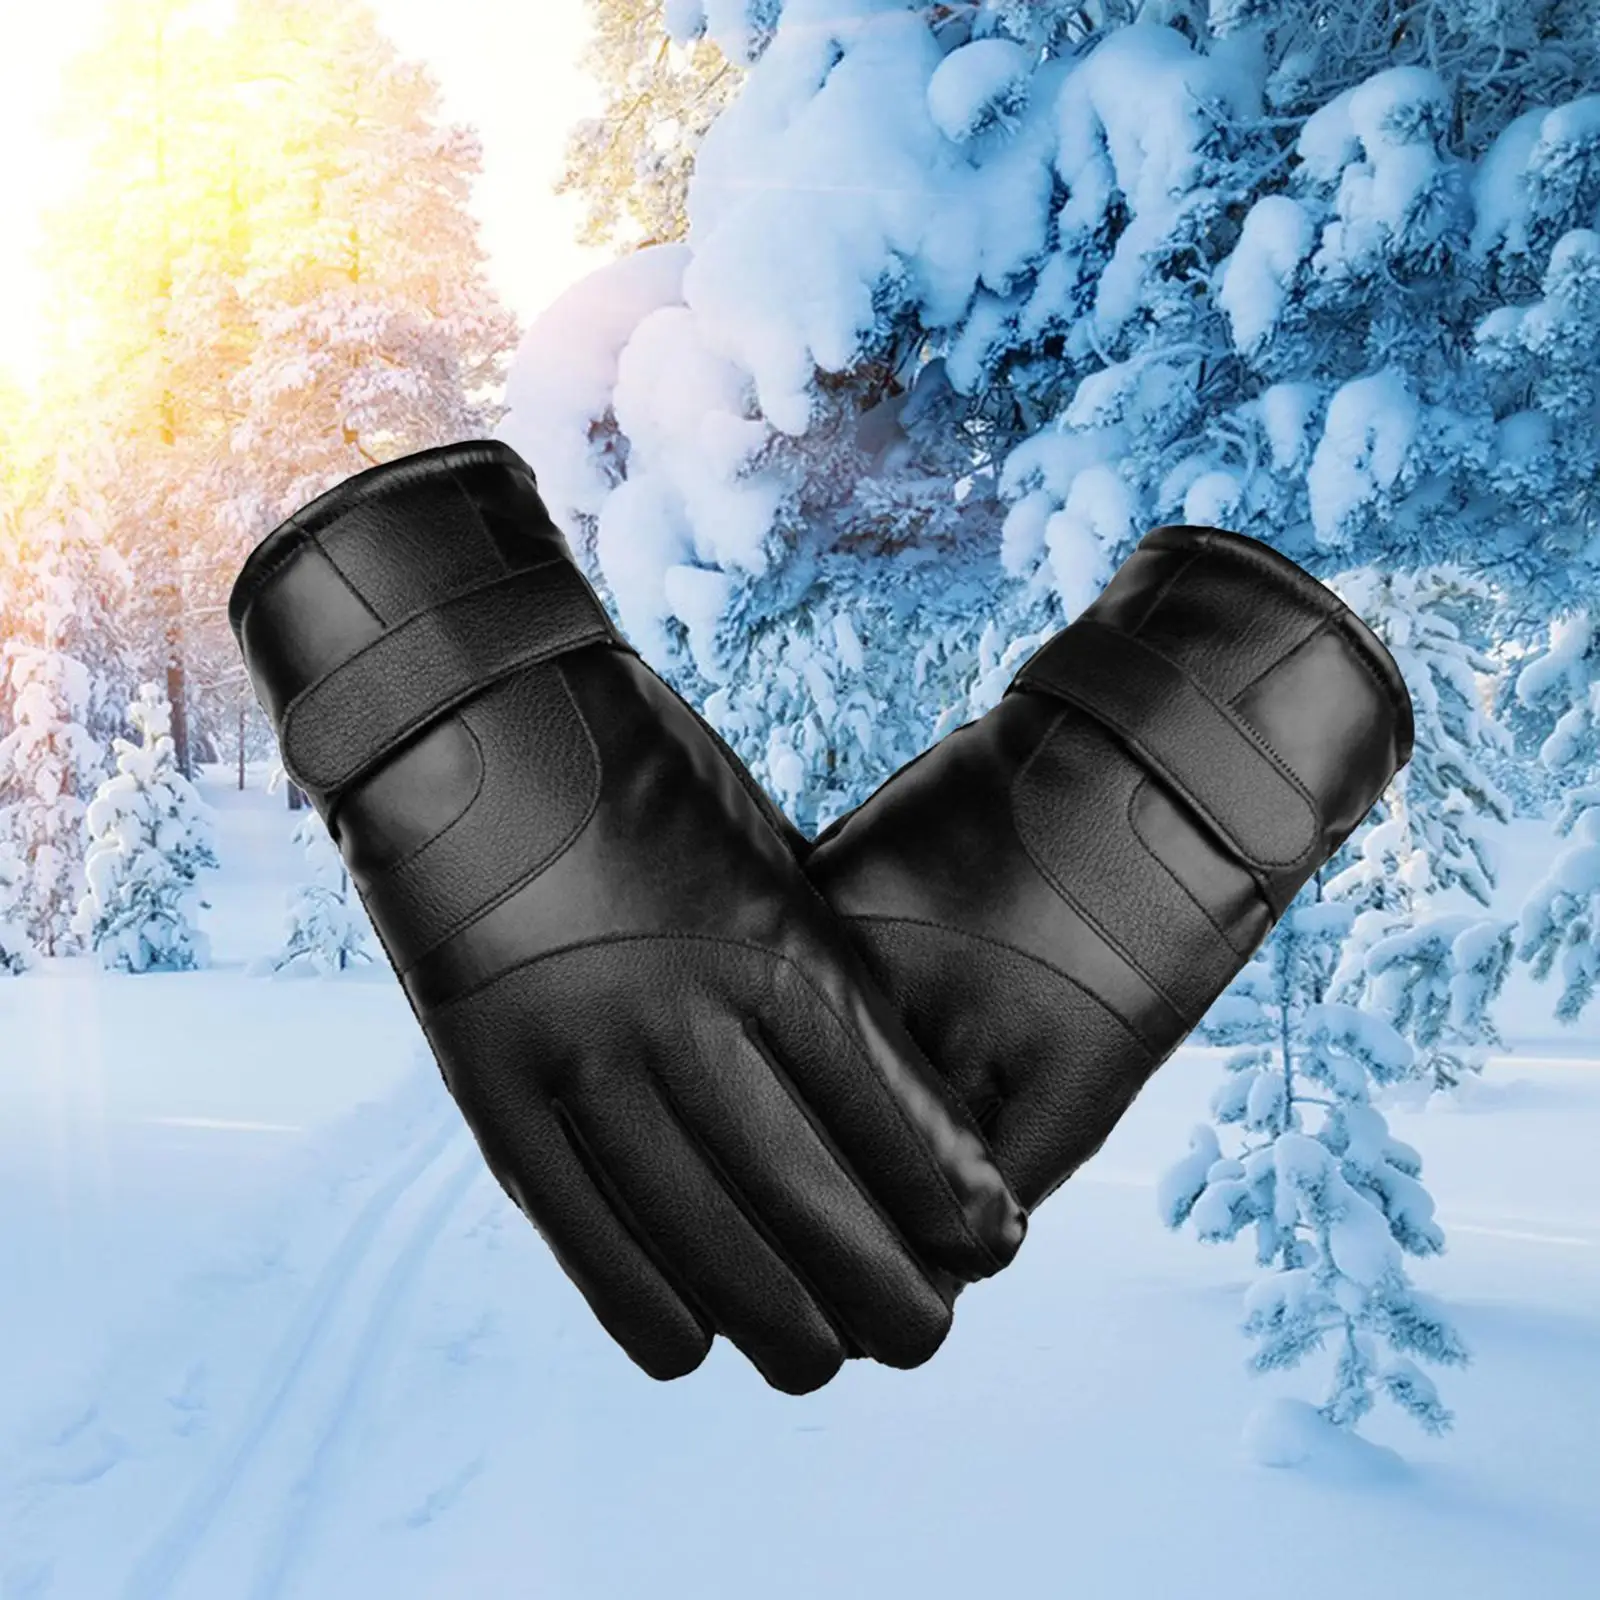 Unisex Winter Thermal Gloves Touchscreen Outdoor for Riding Driving Climbing